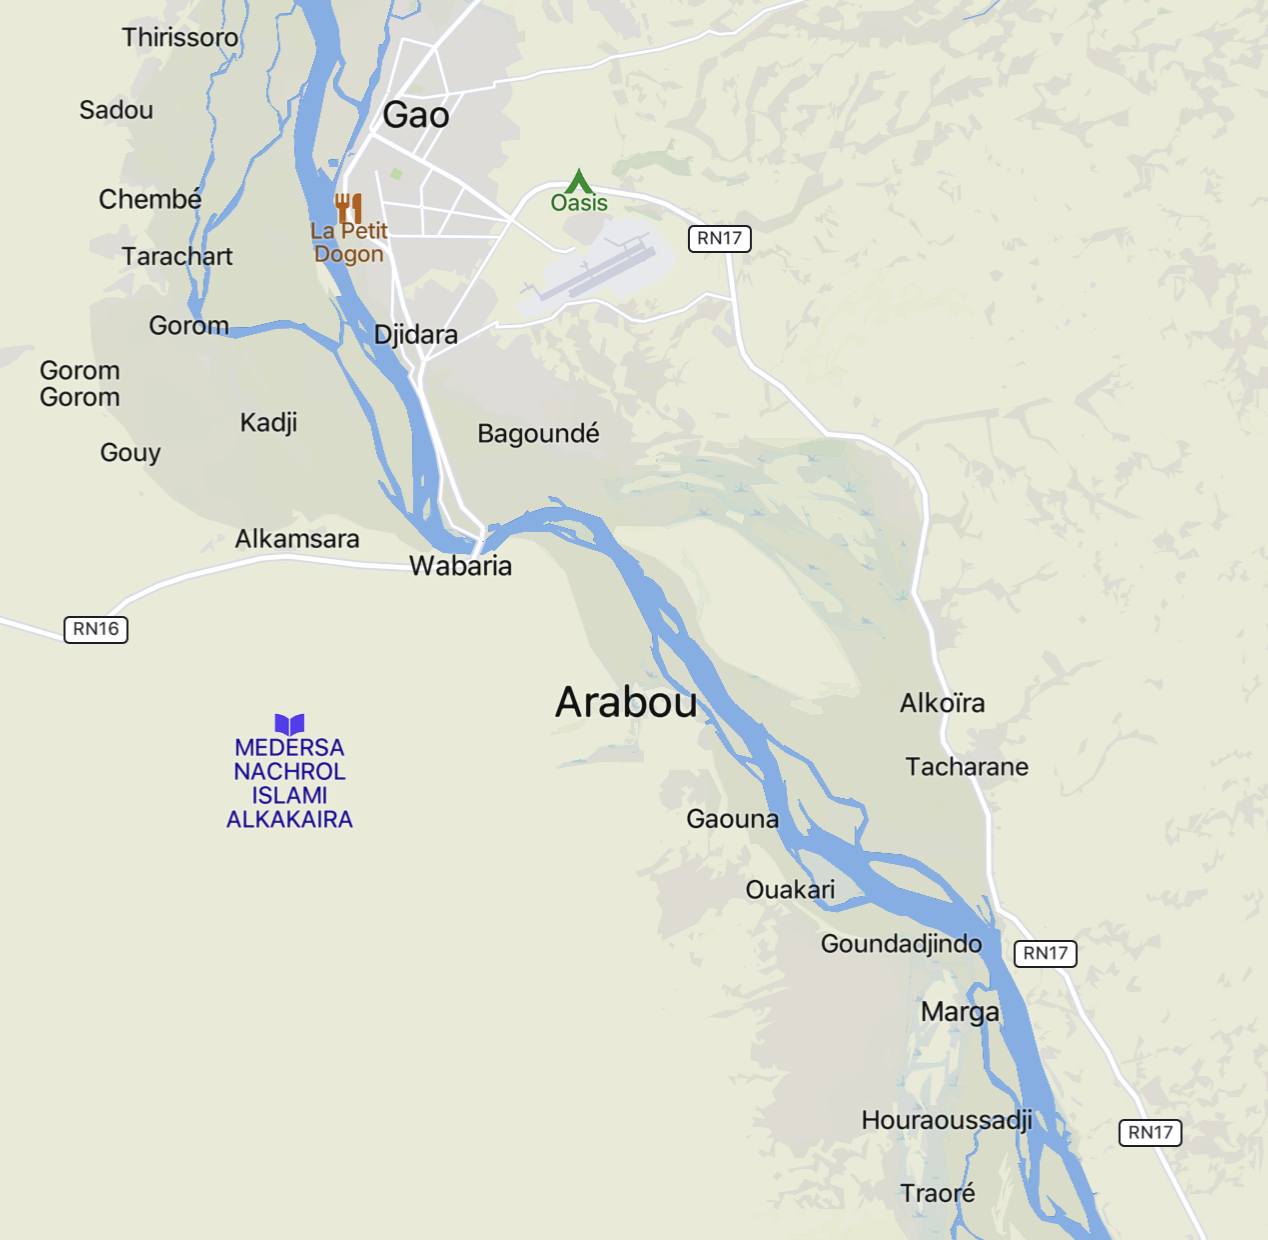 TRAC Incident Report: Suspected Islamic State Greater Sahara (ISGS) Militants Led Armed Assault on NGO Workers Near RN17 in Arabou, Gao Region, Mali - 9 November 2023